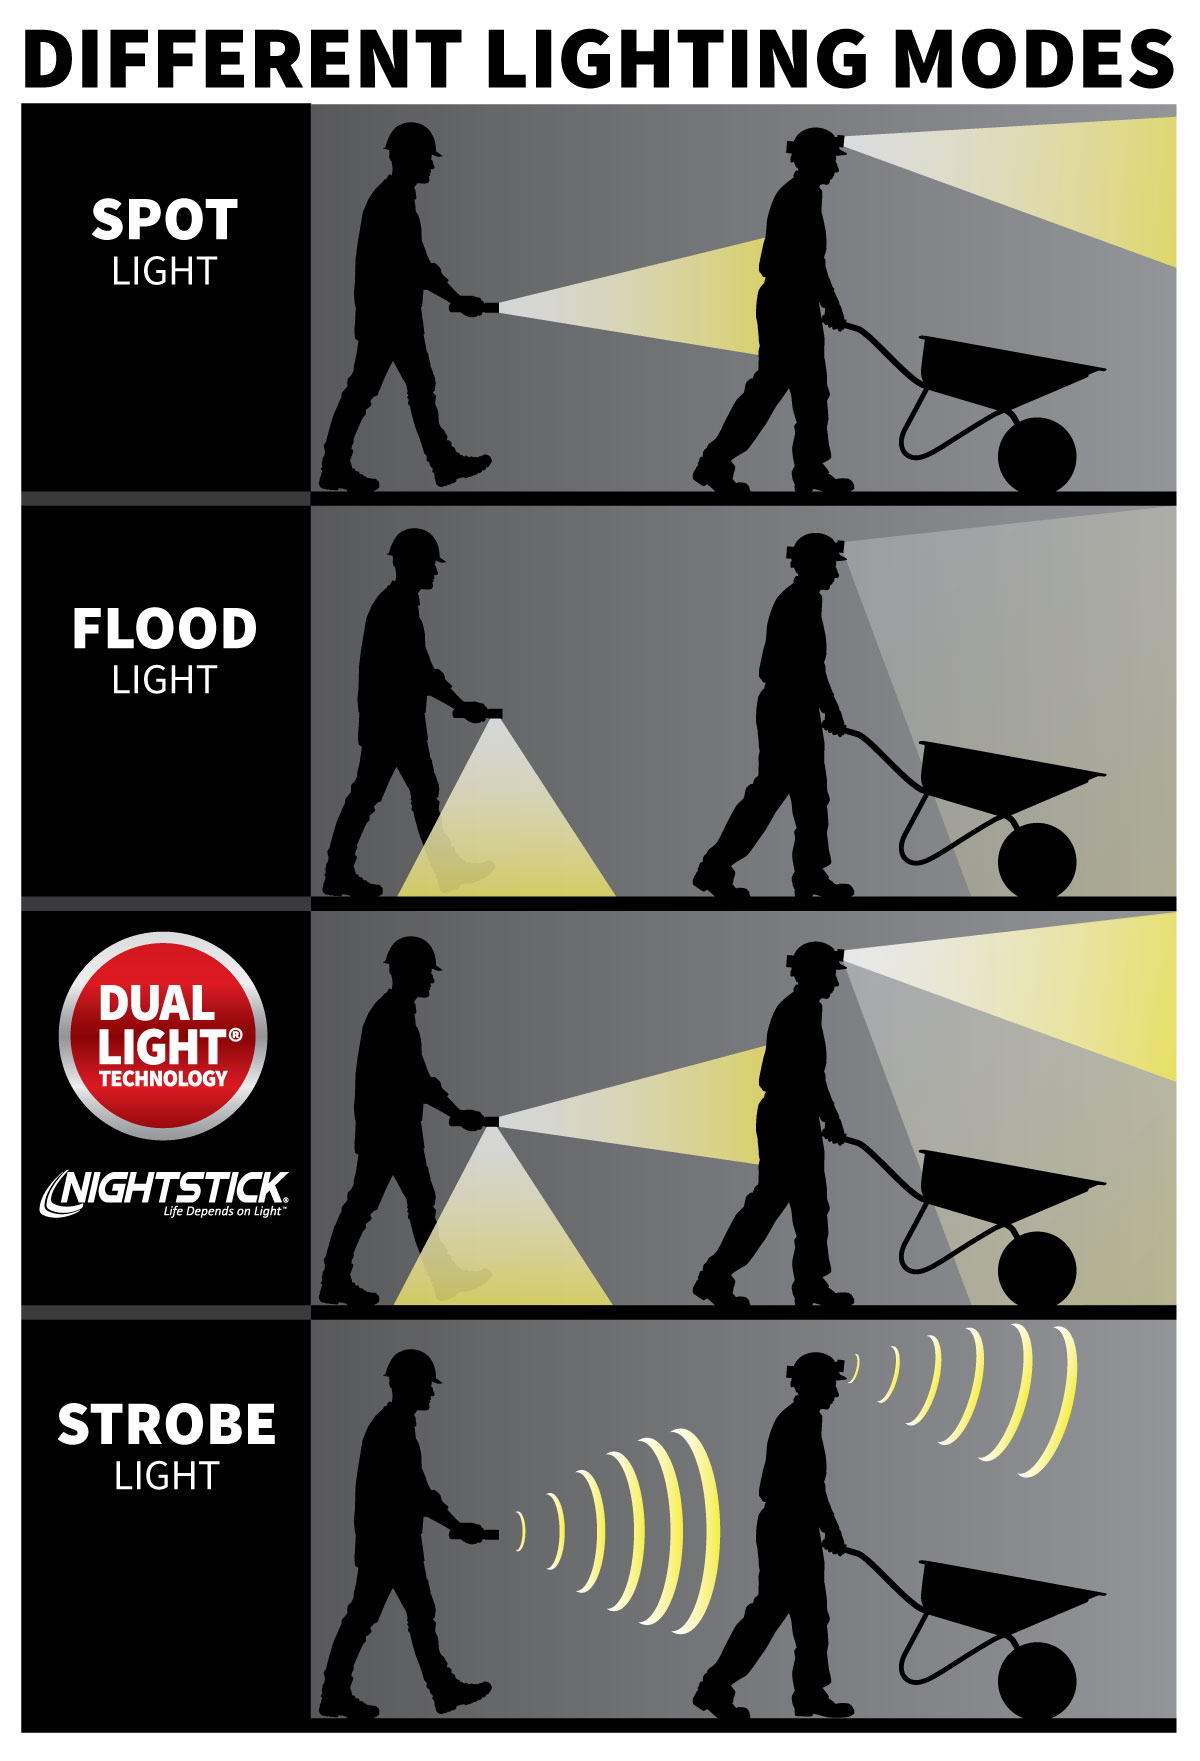 Overview of different types of work lights